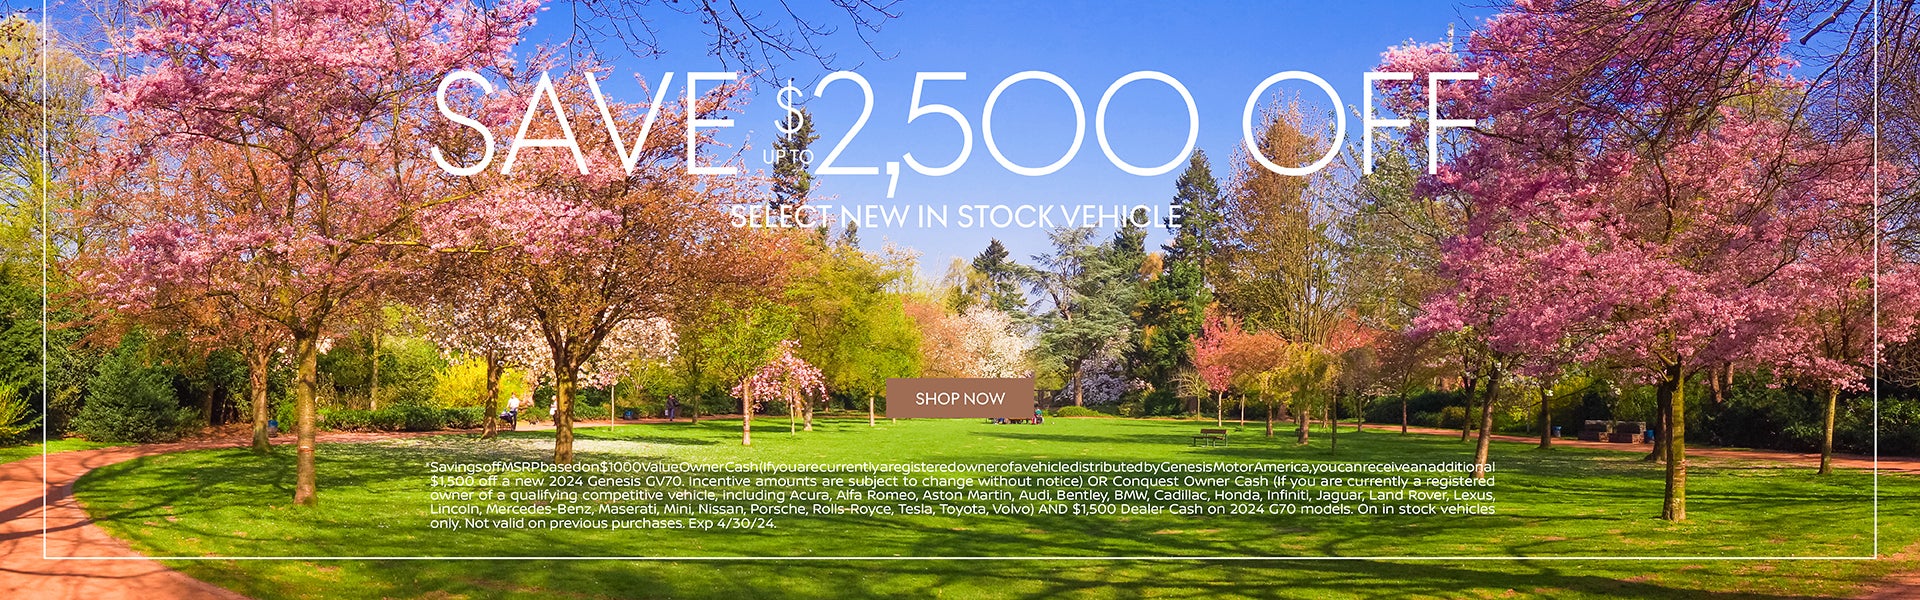 Save up to $2,500 OFF Select New in Stock Vehicle